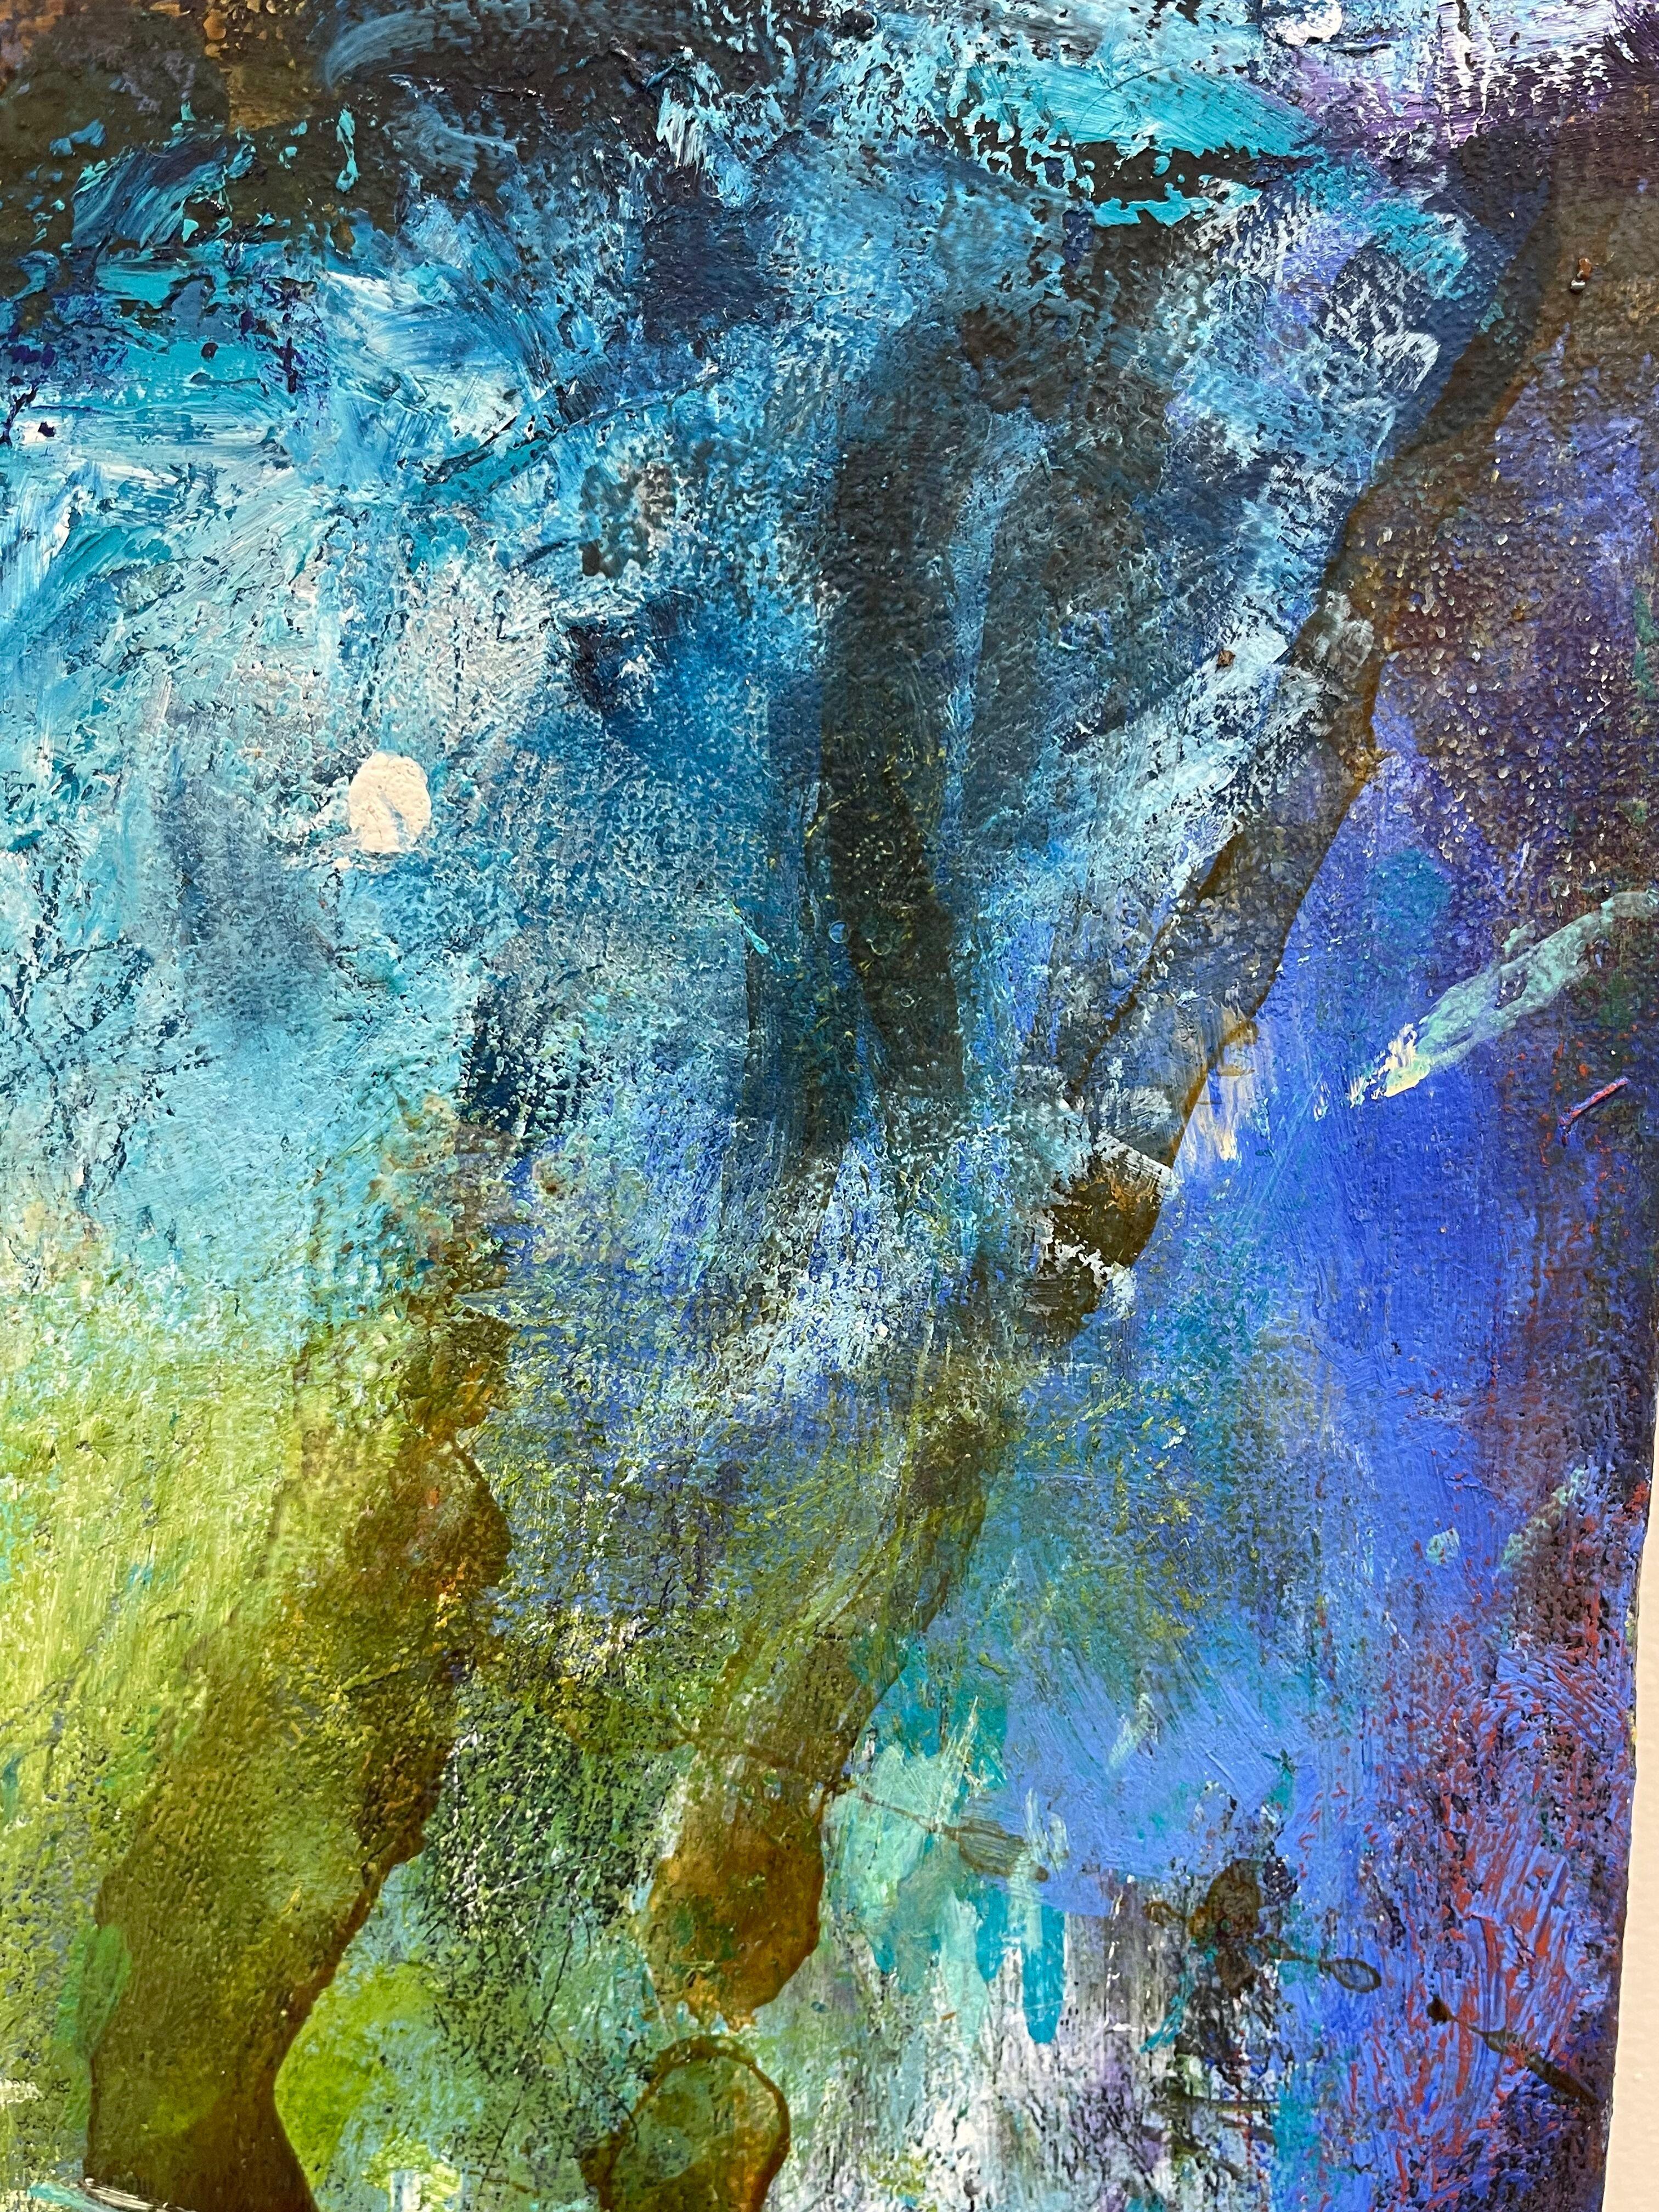 Margaret Ross Tolbert is an artist from Gainesville, Florida. In her works, the lens of water is not only a metaphorical construct but an actual physical space we can enter. When we enter this space, we are transformed. Her work has since been about